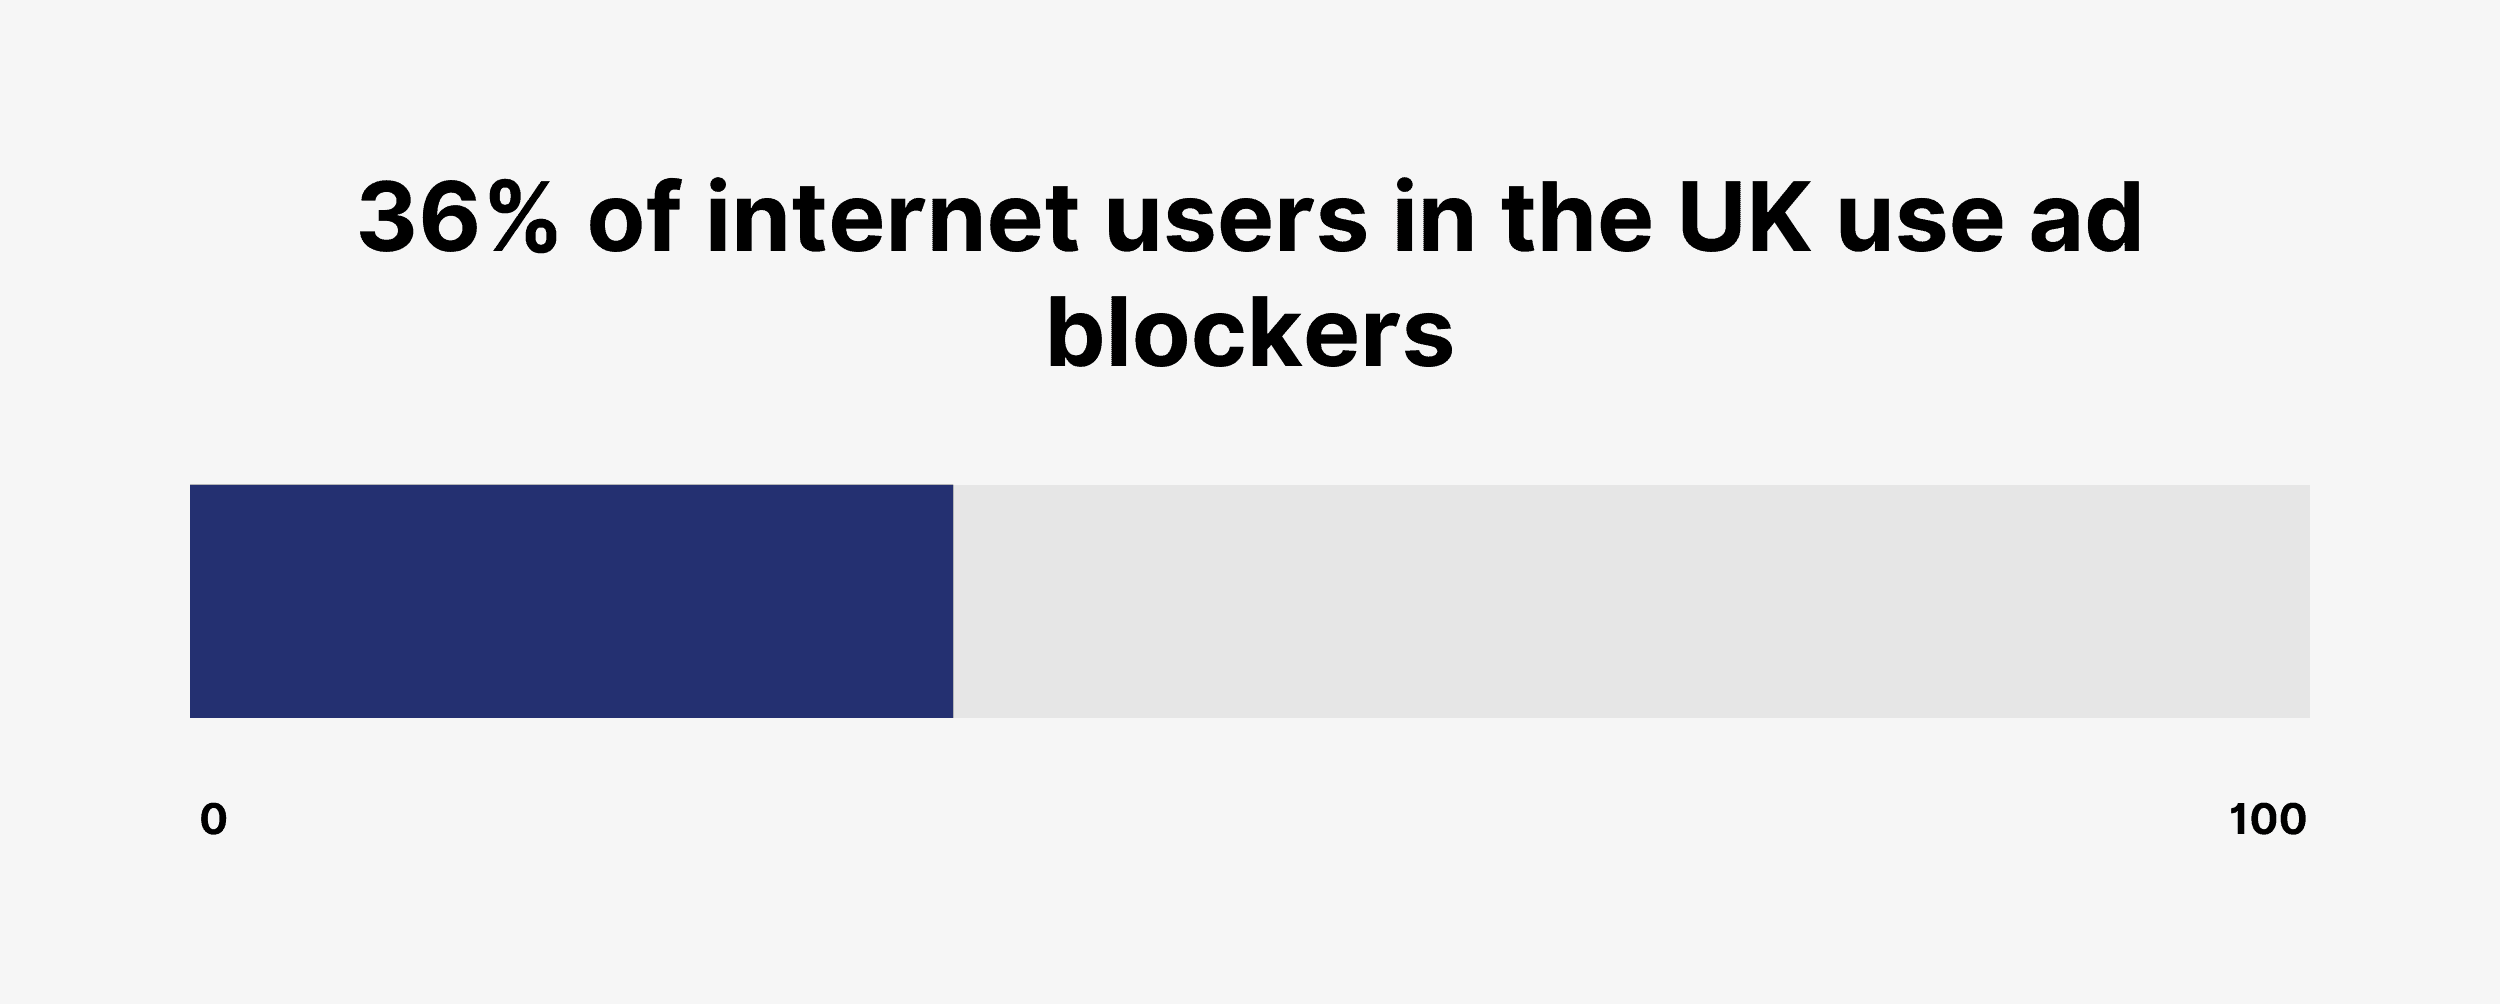 36% of internet users in the UK use ad blockers